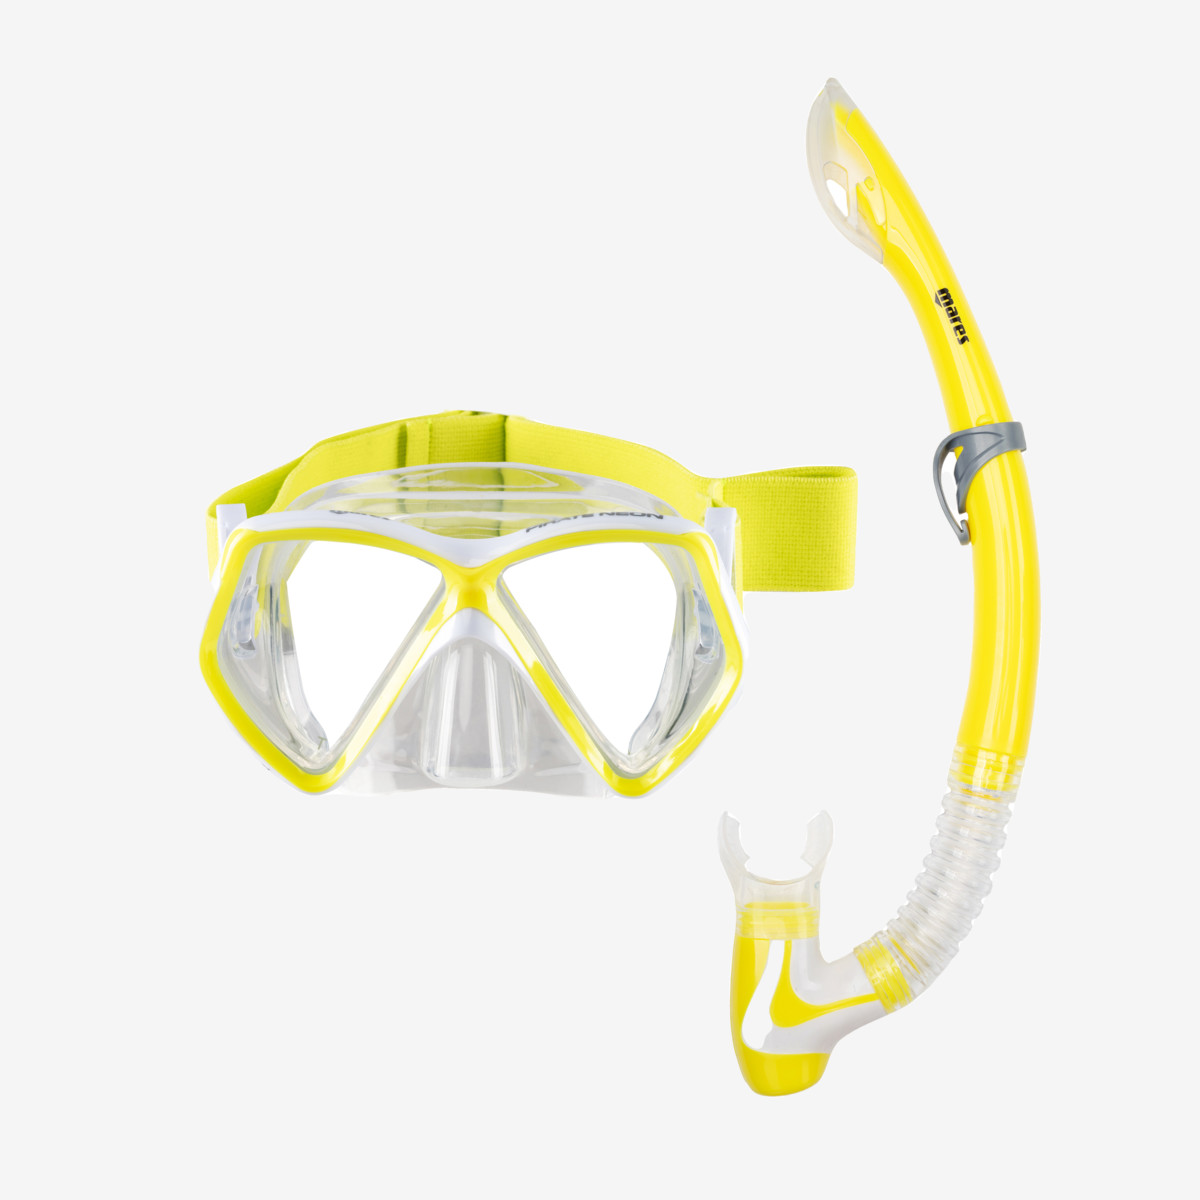 Mares Combo Pirate Neon Snorkeling